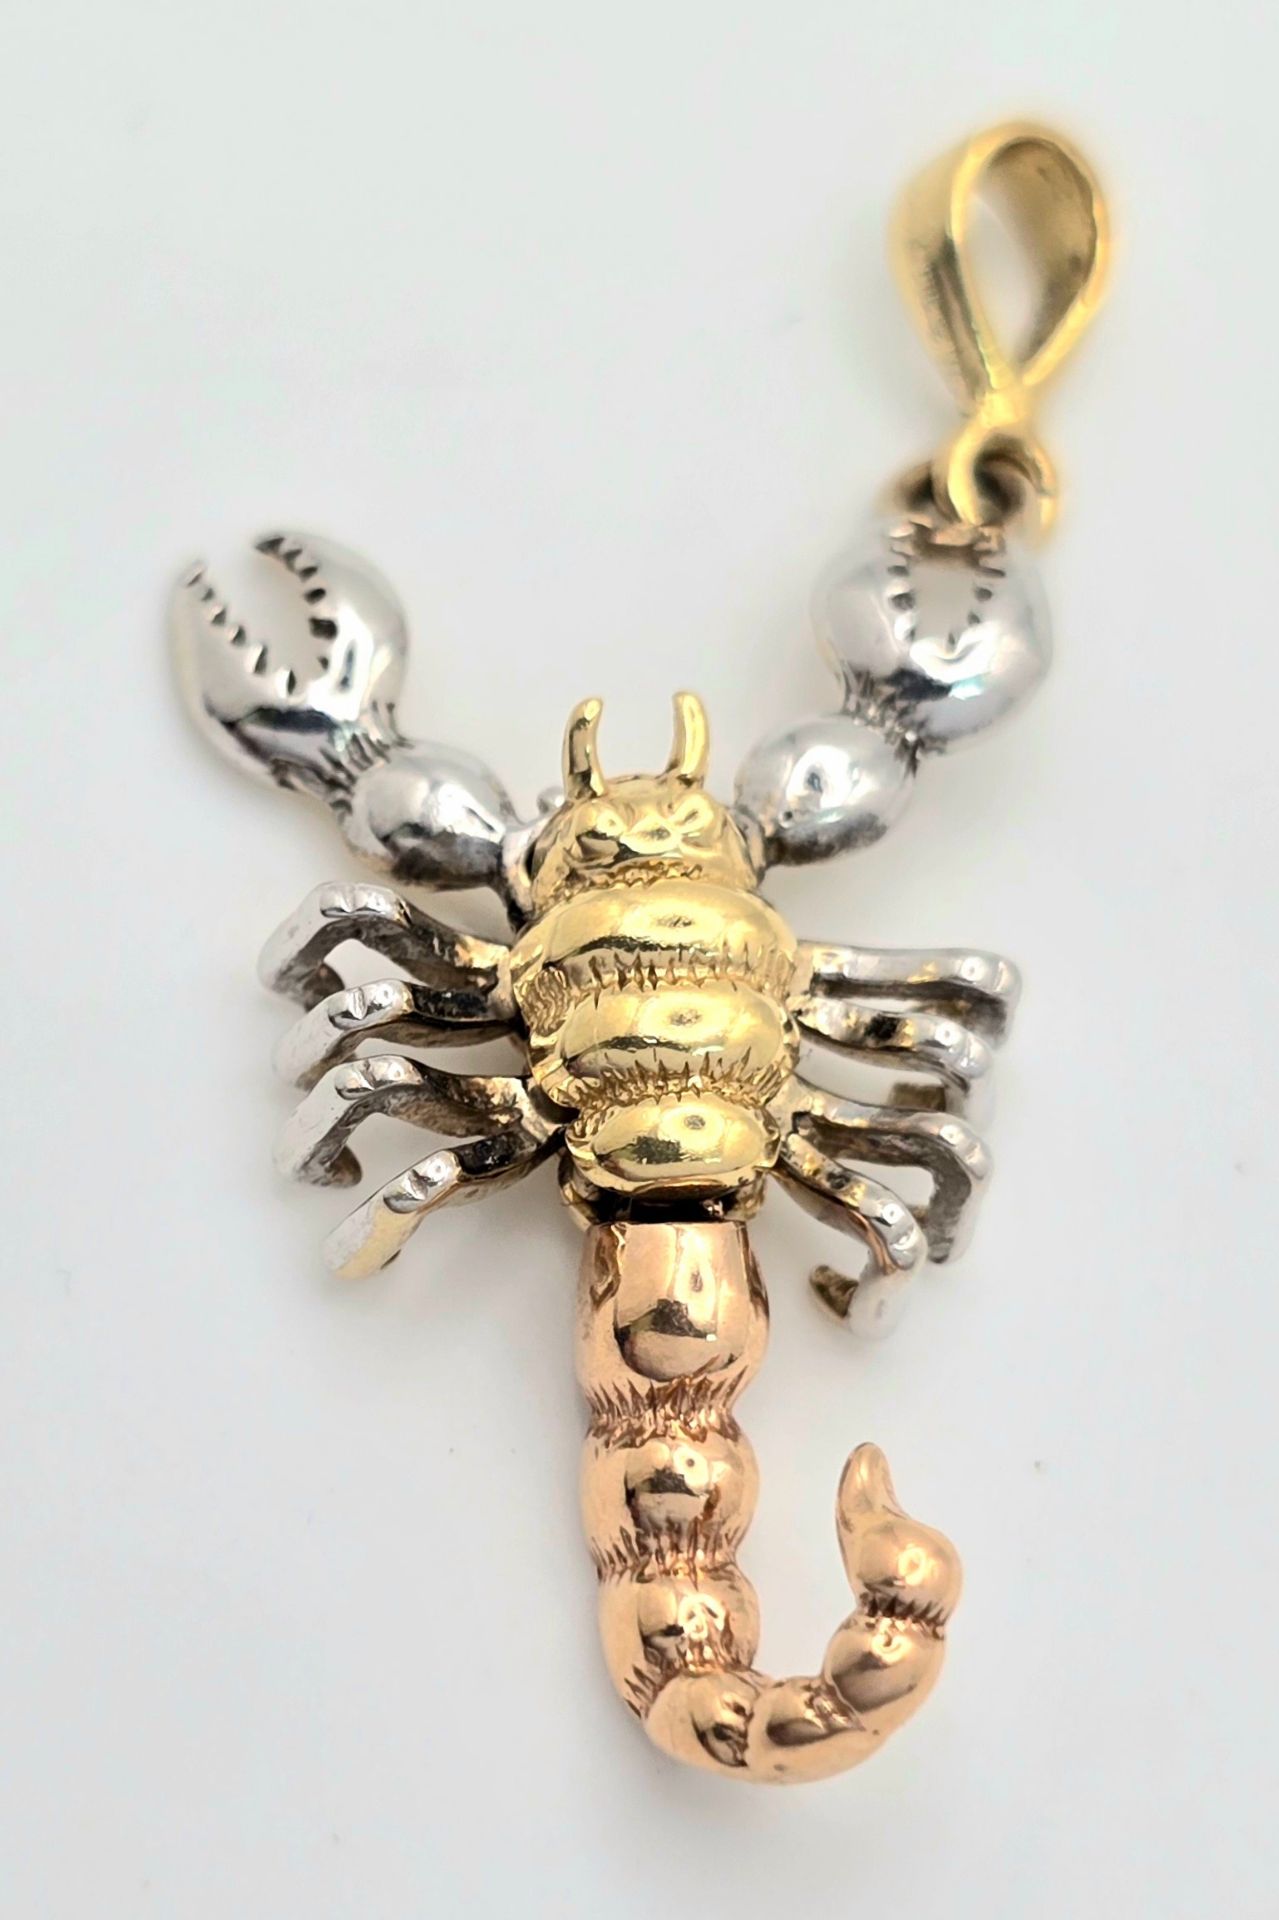 A 14K 3 COLOUR ARTICULATED SCORPION CHARM. 3.5cm length, 3g total weight. Ref: SC 8050 - Image 2 of 4